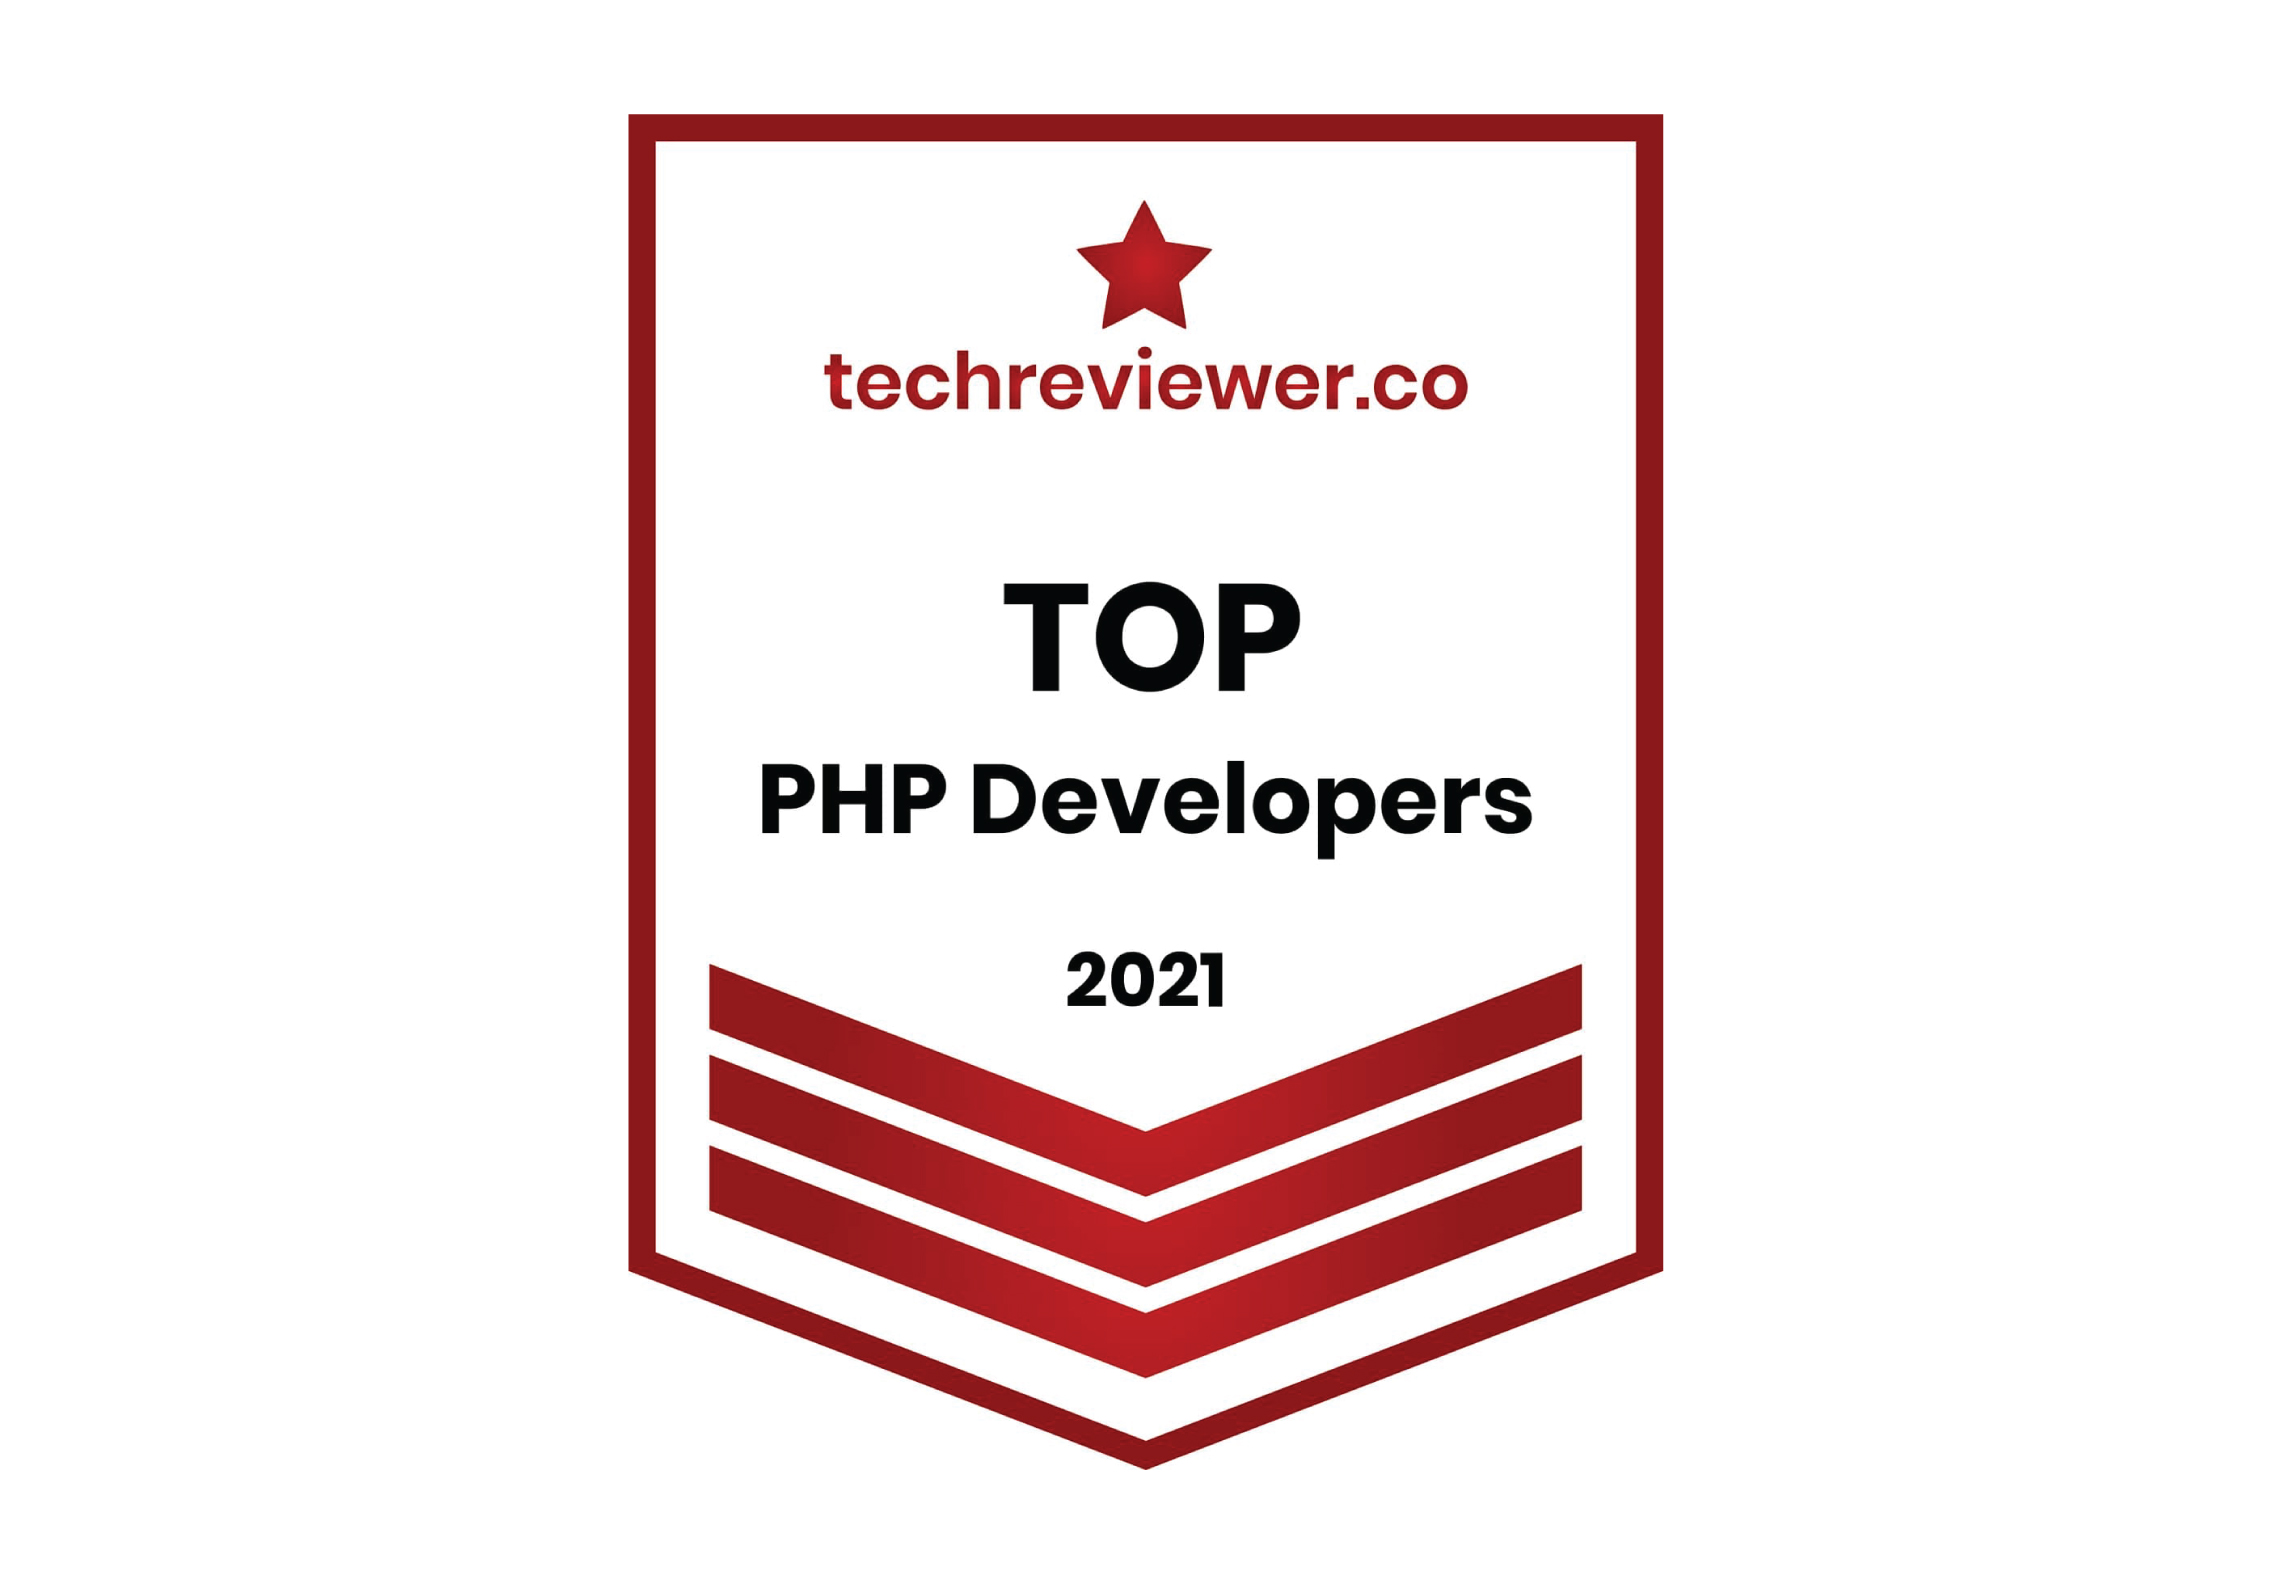 Knovator Technologies is Among Top PHP Development Companies in 2021